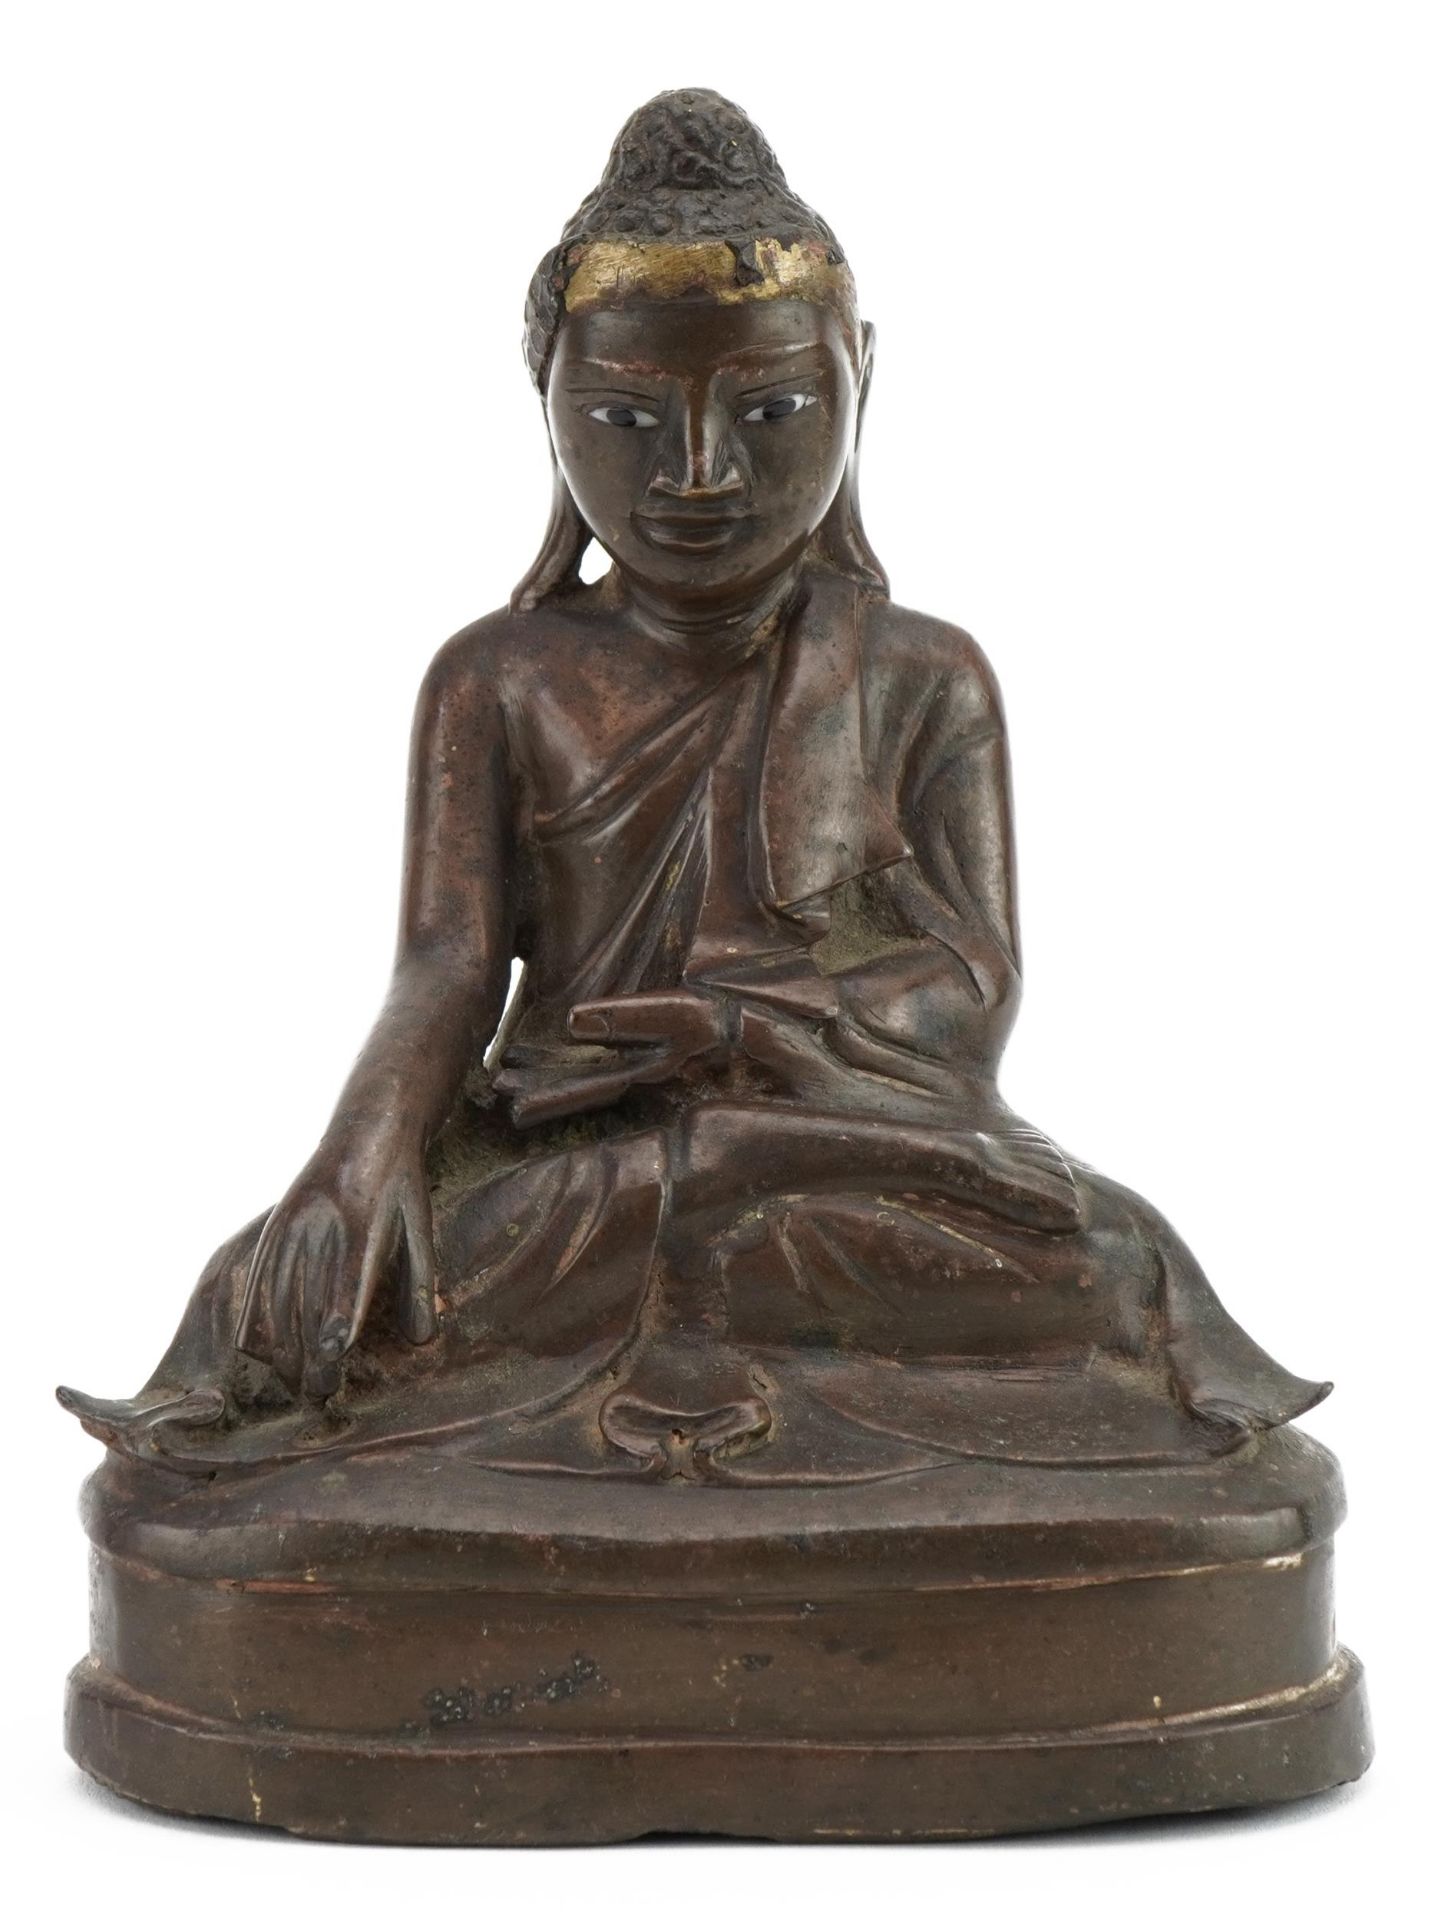 Chino Tibetan patinated bronze figure of Buddha, 16cm high : For further information on this lot